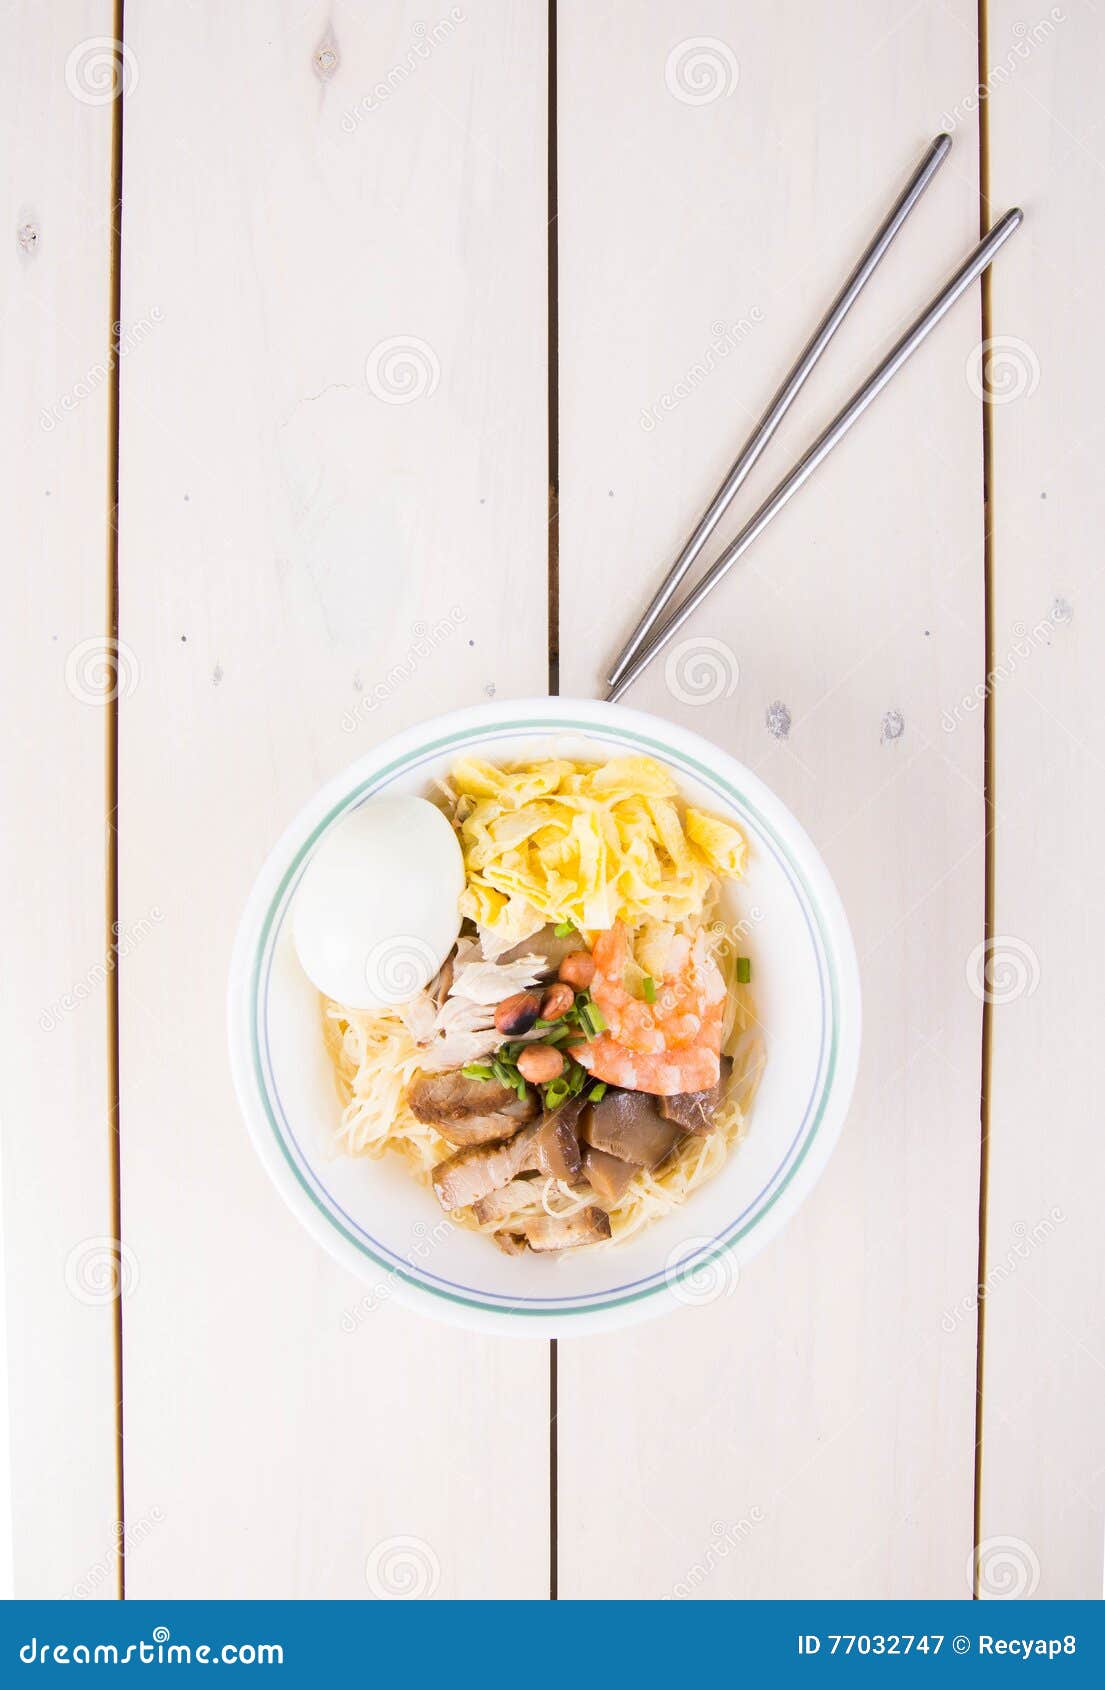 Birthday misua stock image. Image of dinner, lunch, cooked - 77032747